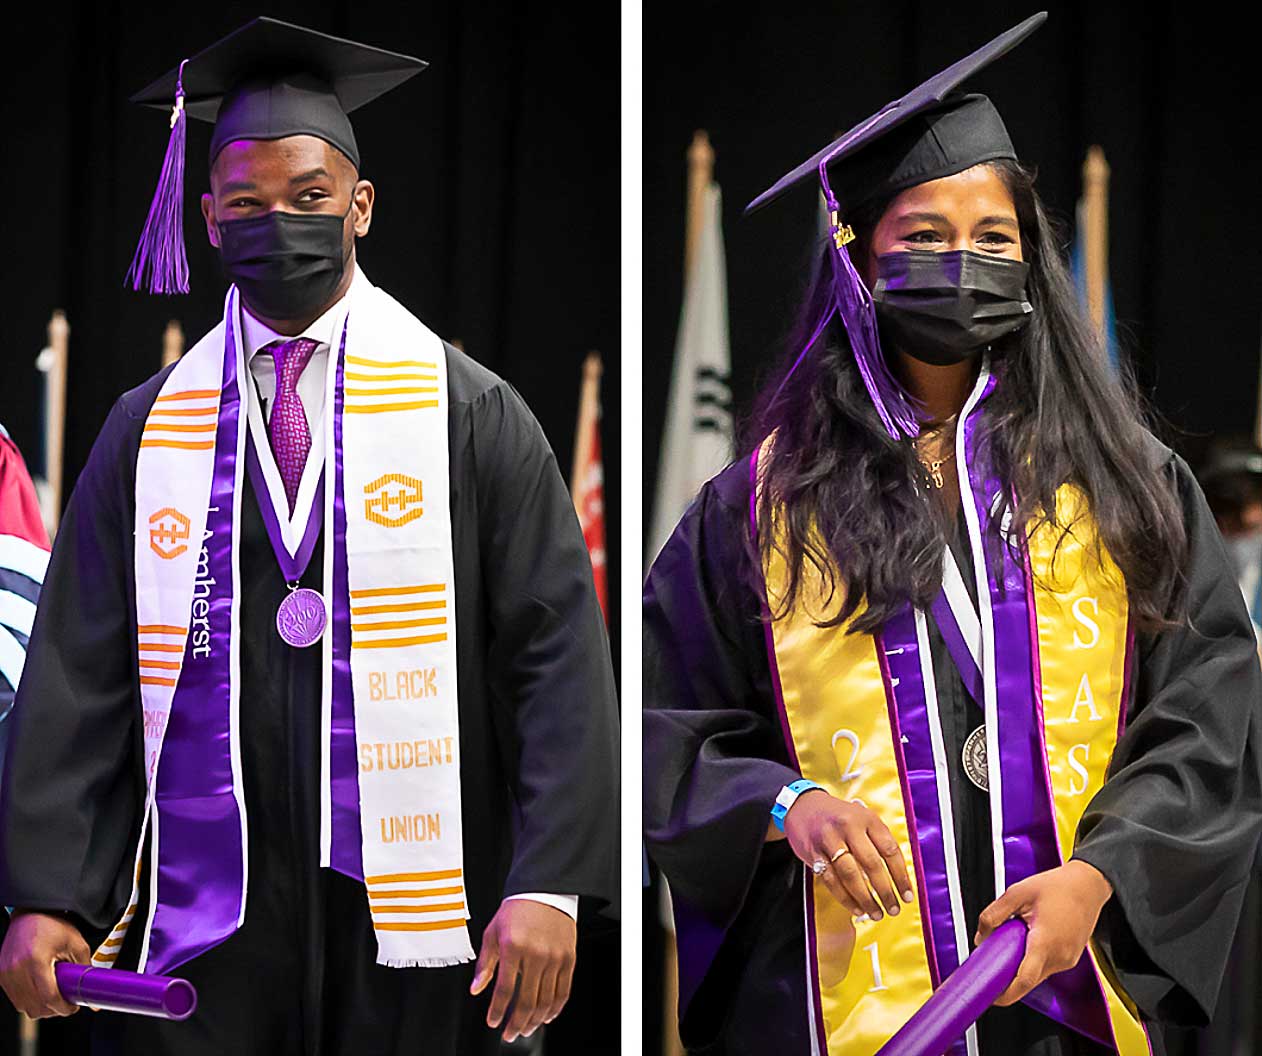 Two graduates exiting the stage after getting their diplomas